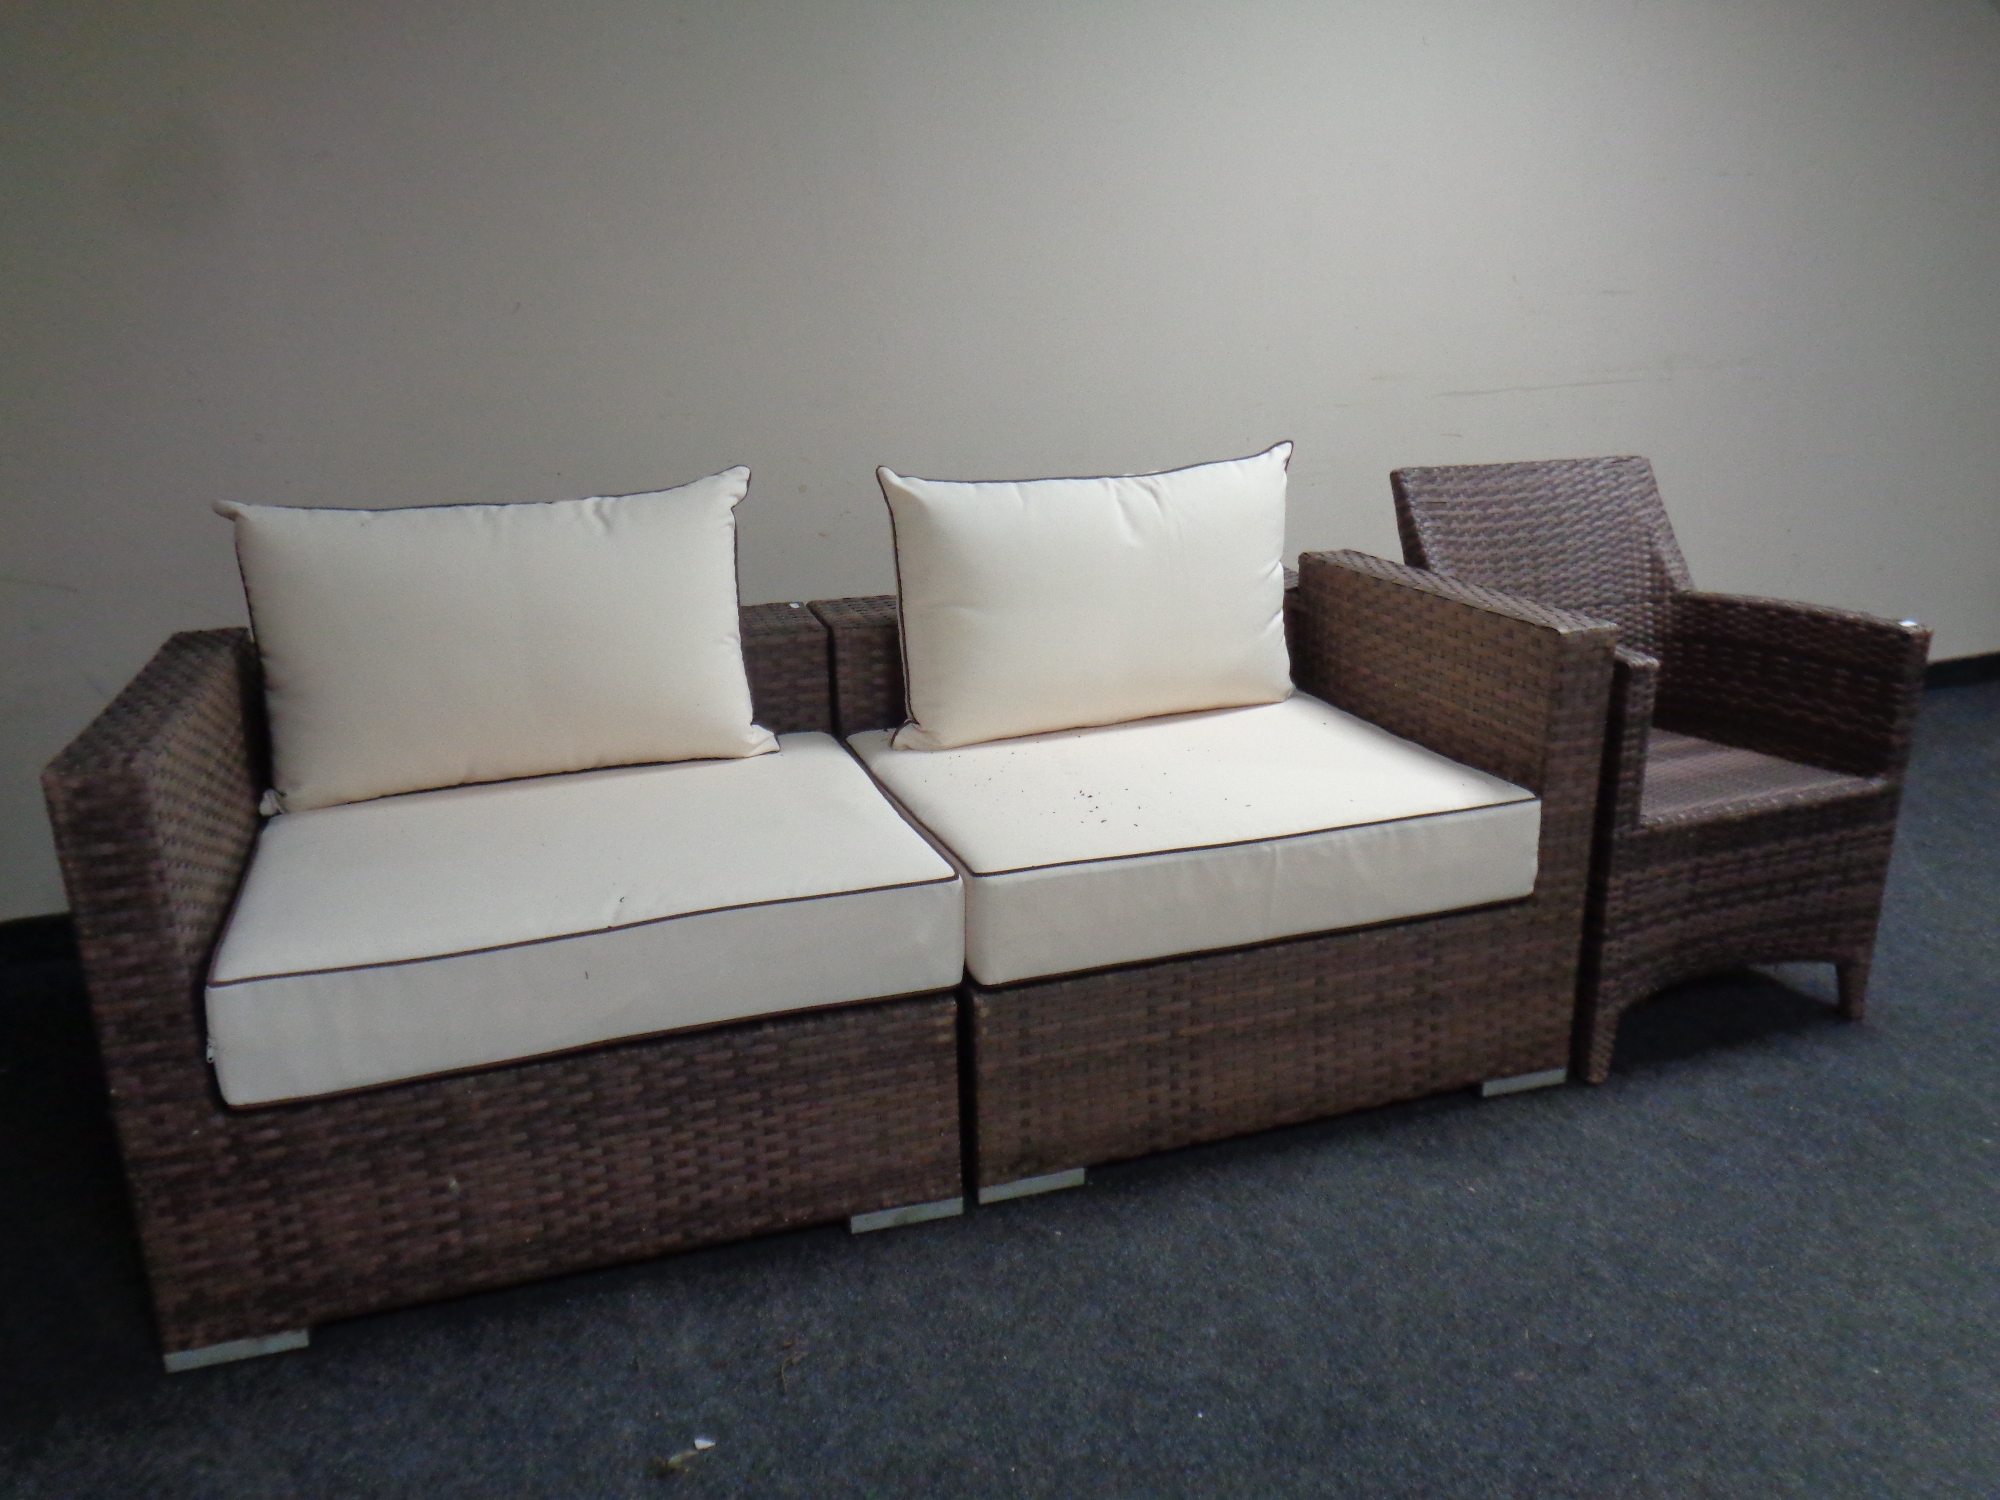 A rattan two seater settee together with an armchair